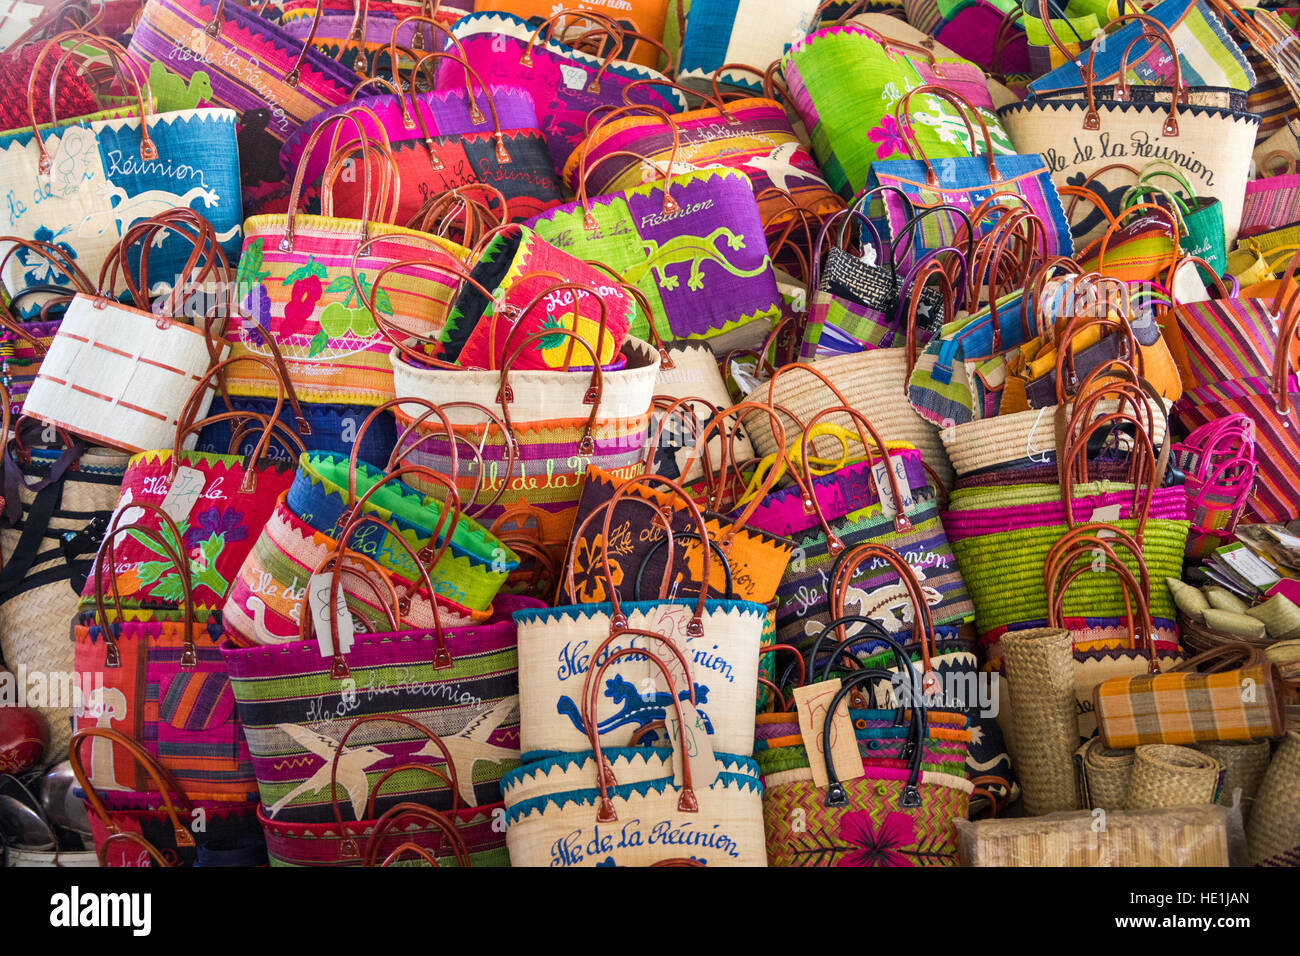 Local crafts at the covered market in St Pierre, Reunion Island Stock Photo